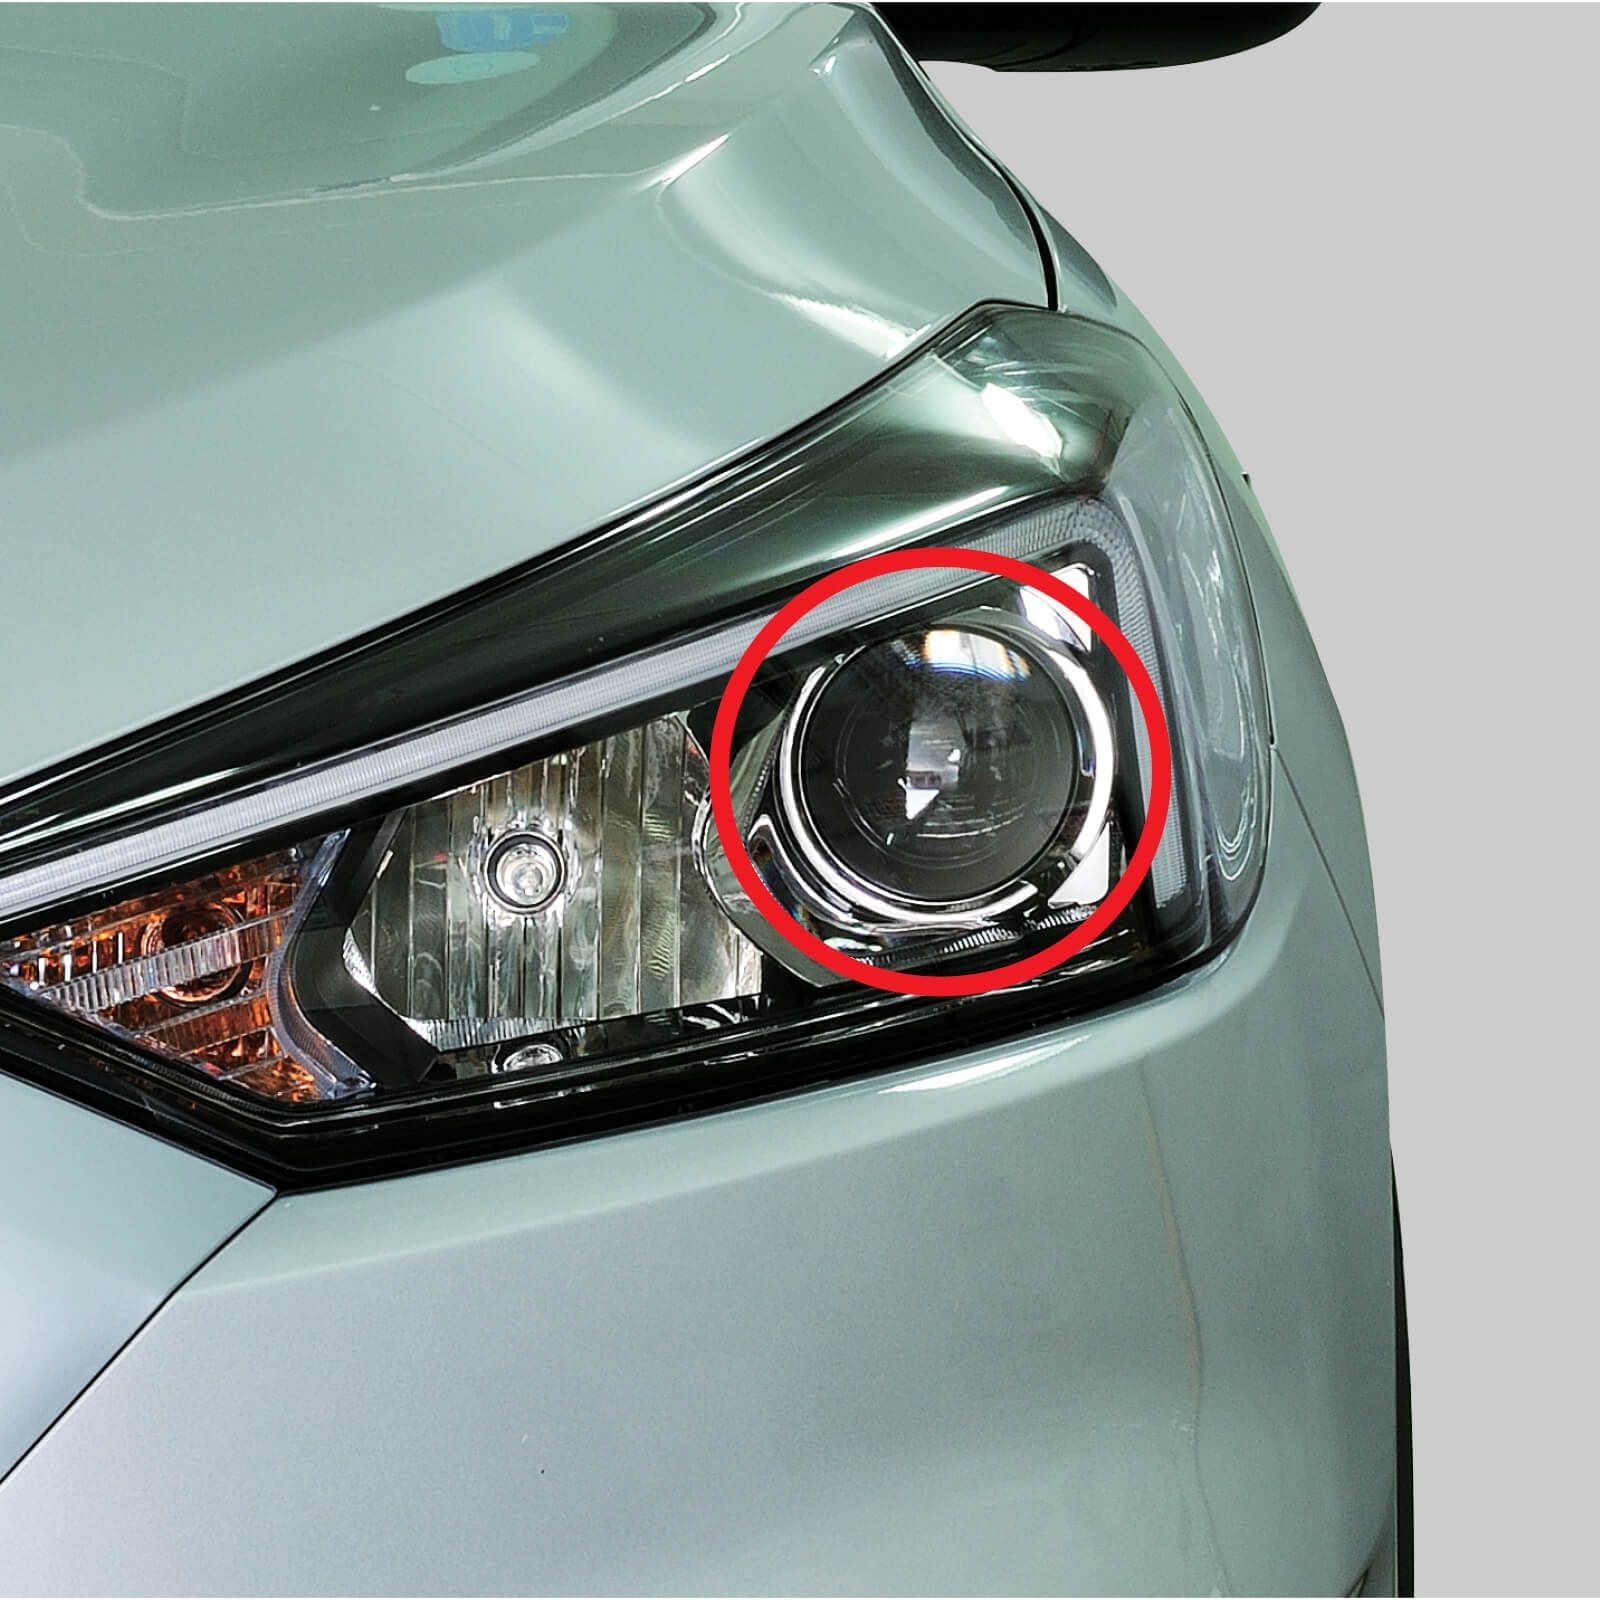 A close up of a projector style headlight on a white car